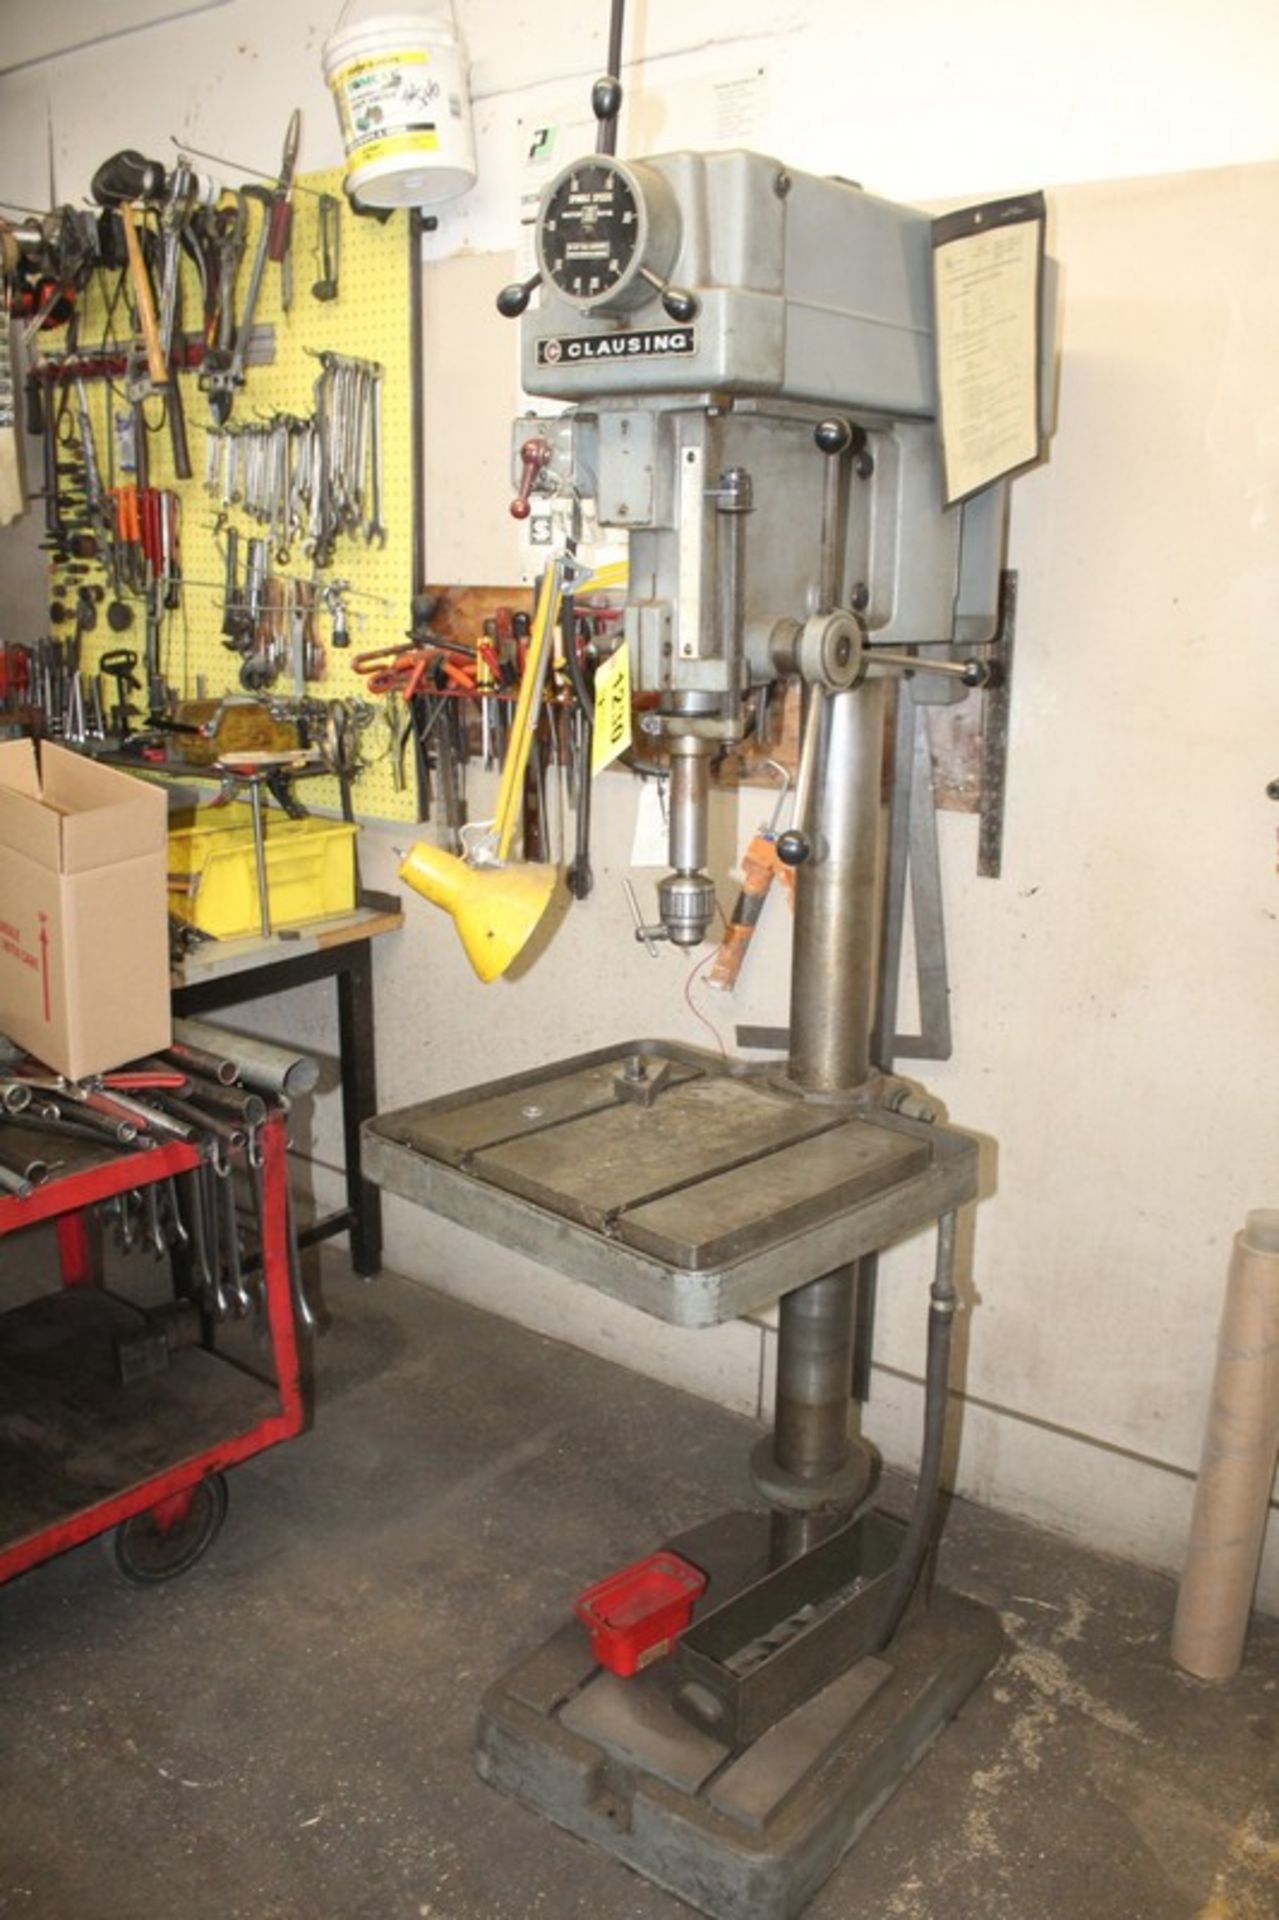 CLAUSING 20” MODEL 2276 VARIABLE SPEED FLOOR STANDING DRILL PRESS, S/N 516519, SPINDLE SPEEDS 150-